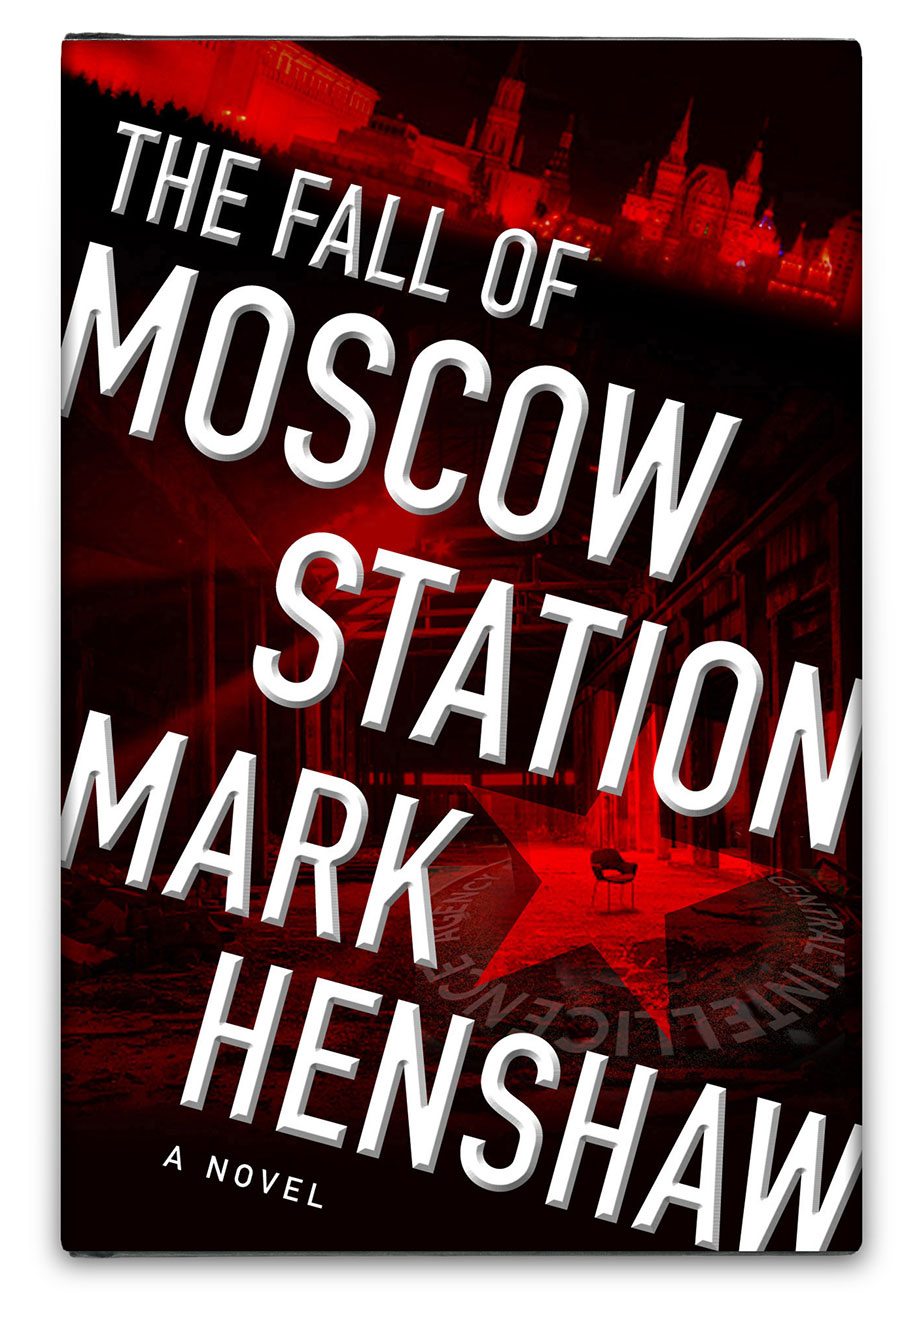 THE FALL OF MOSCOW STATION (comp)